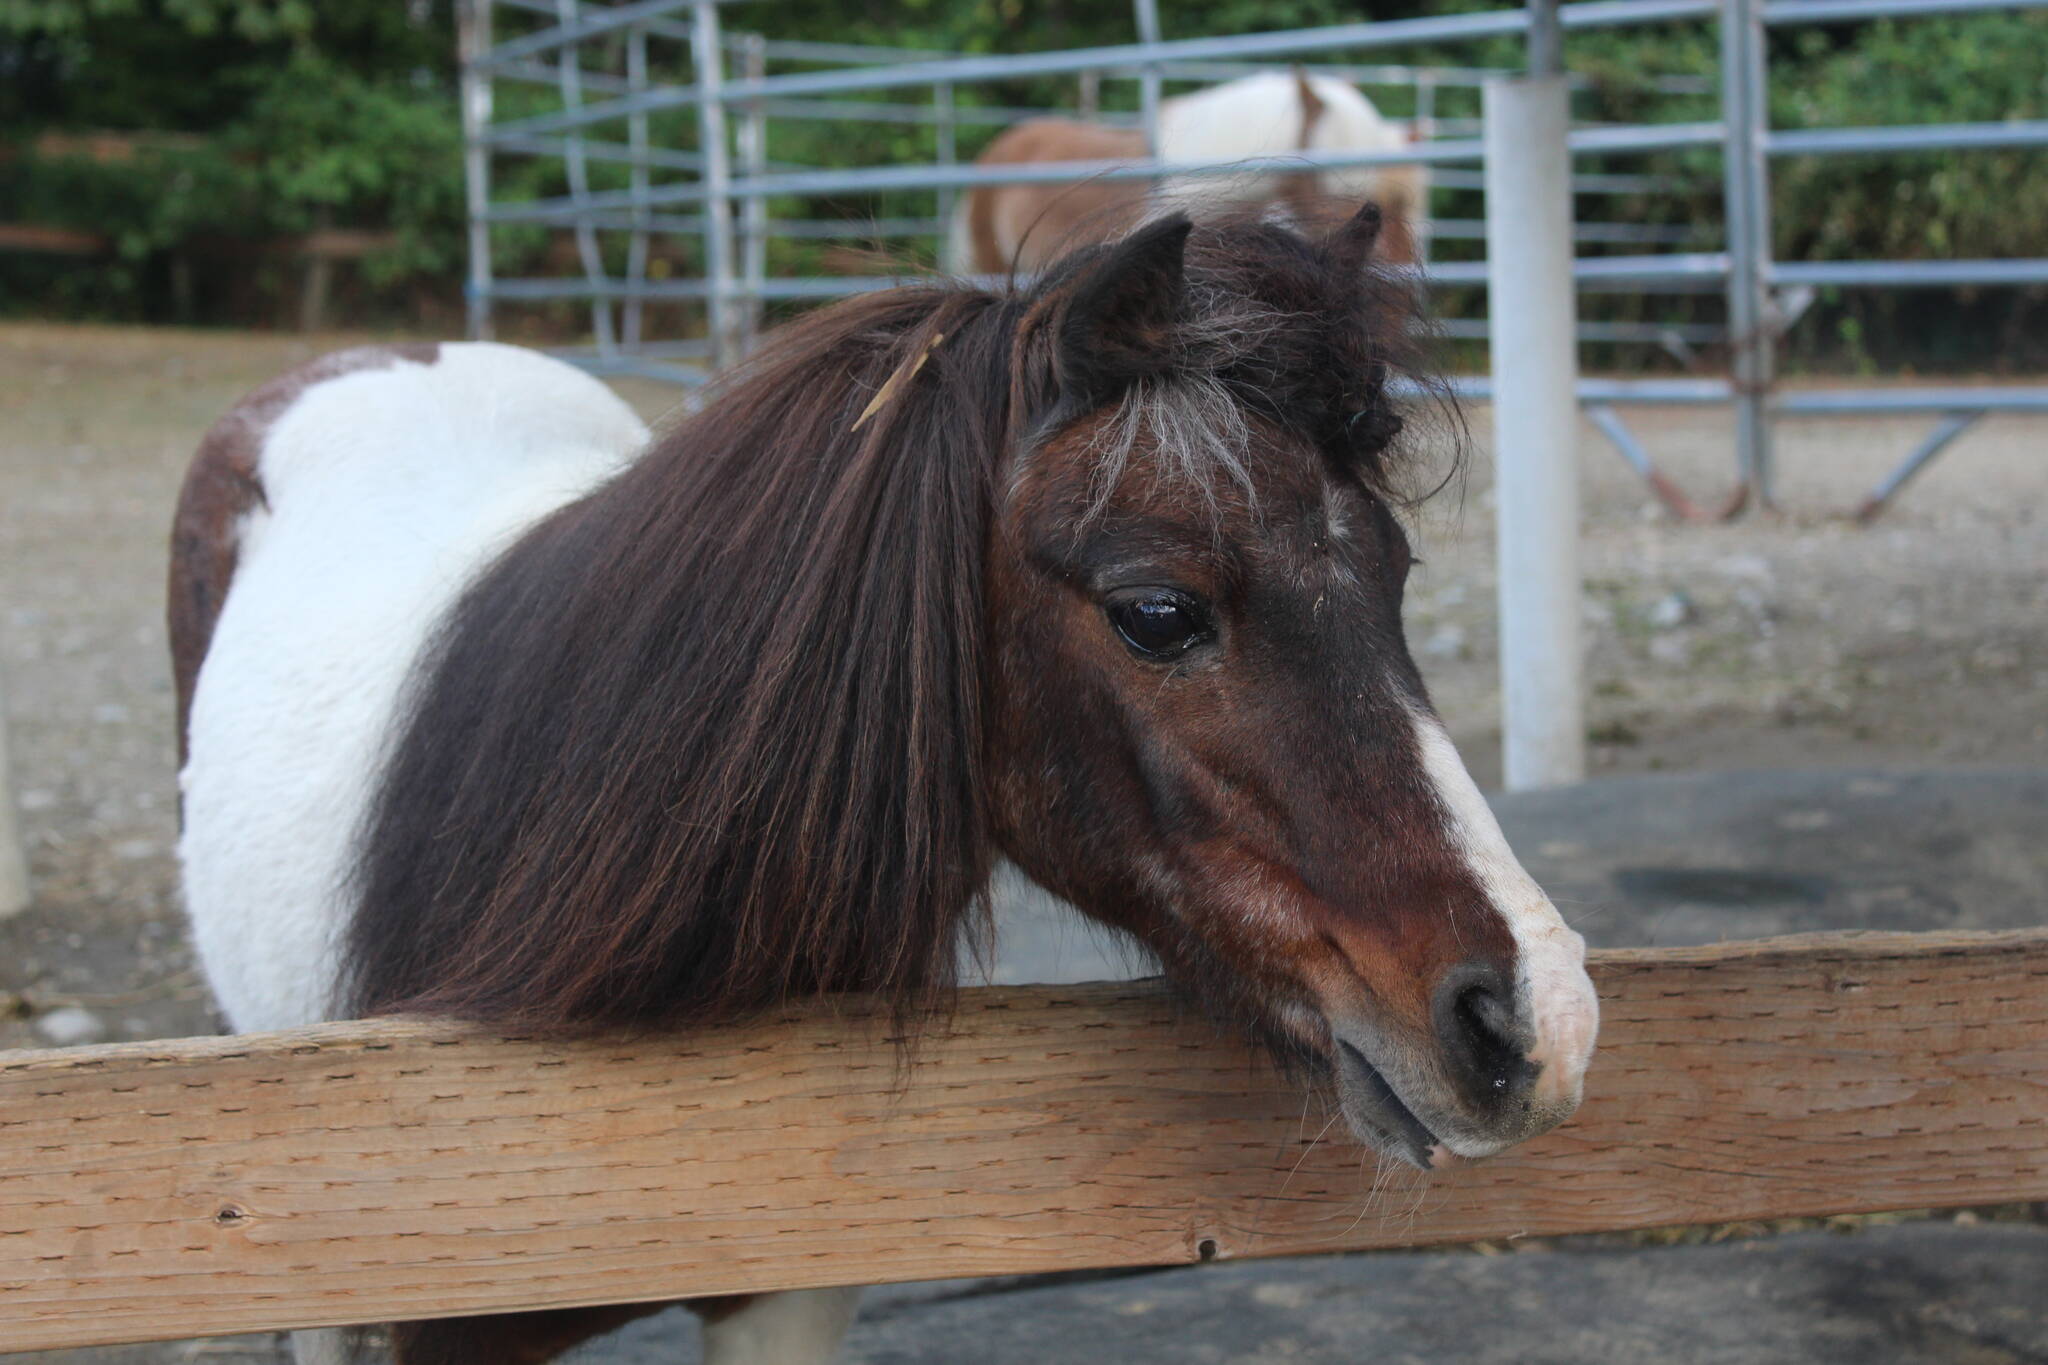 Little D was rescued from a hoarding situation and weighed only 100 pounds when arriving at Serenity Equine. Born in 1987, he’s almost completely blind.